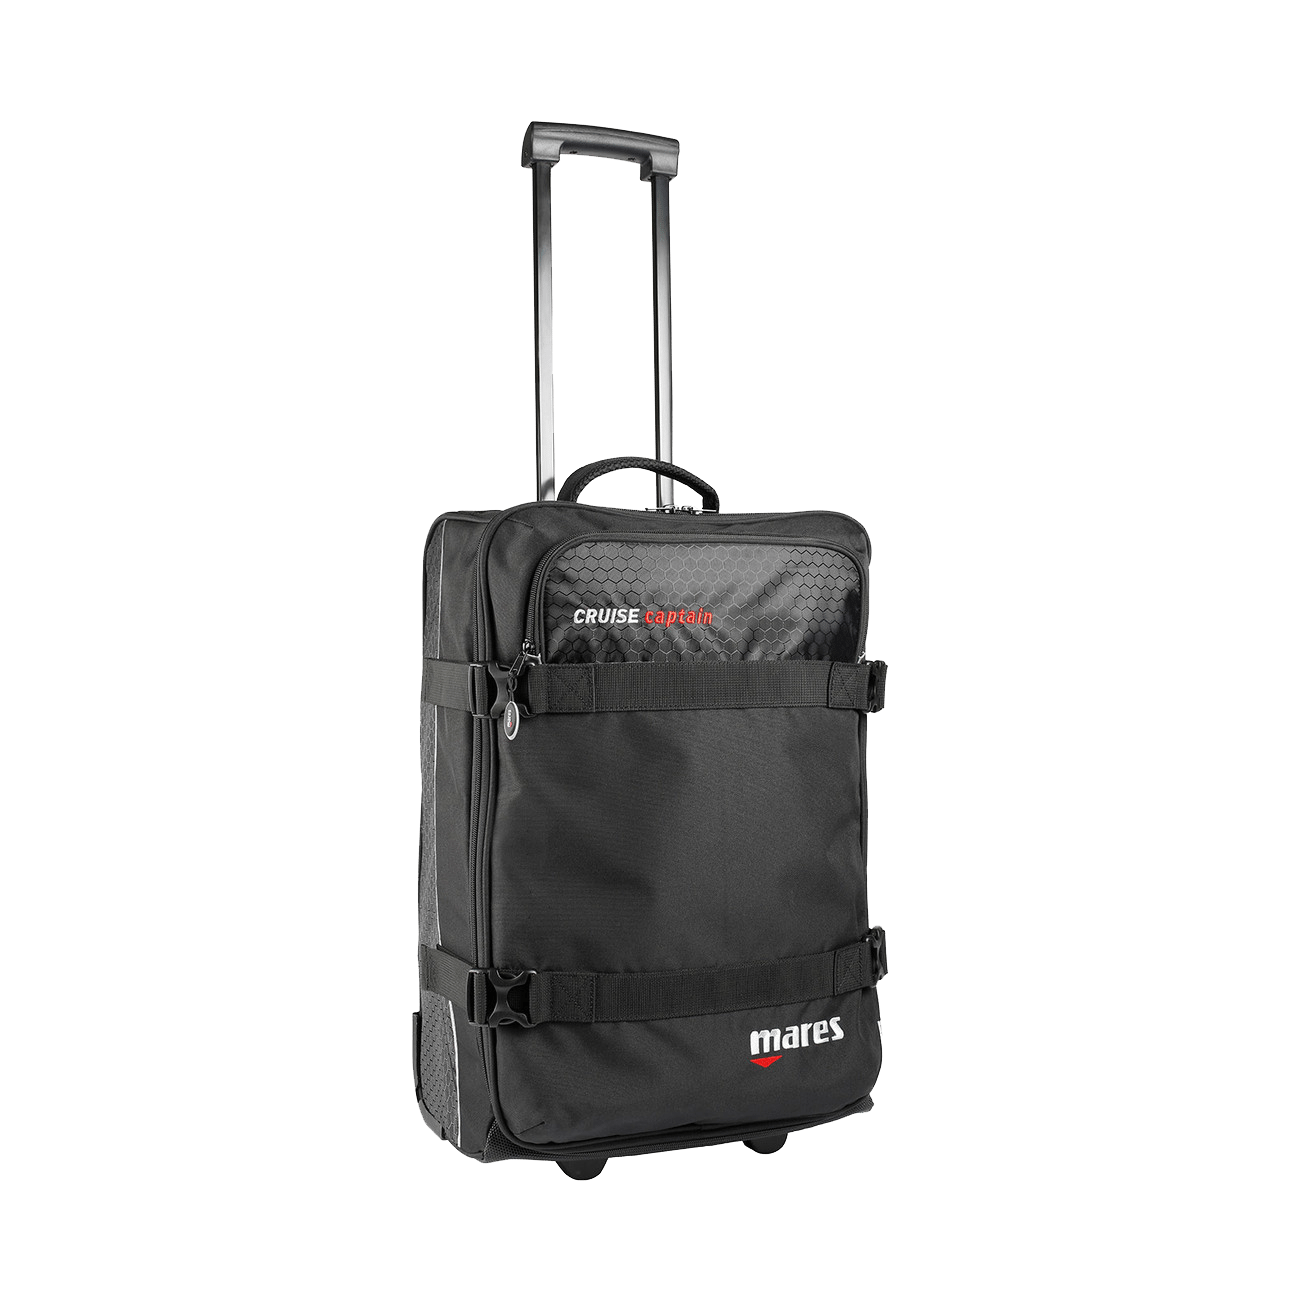 Mares Cruise Captain Roller Bag | Mares Bags | Mares Singapore